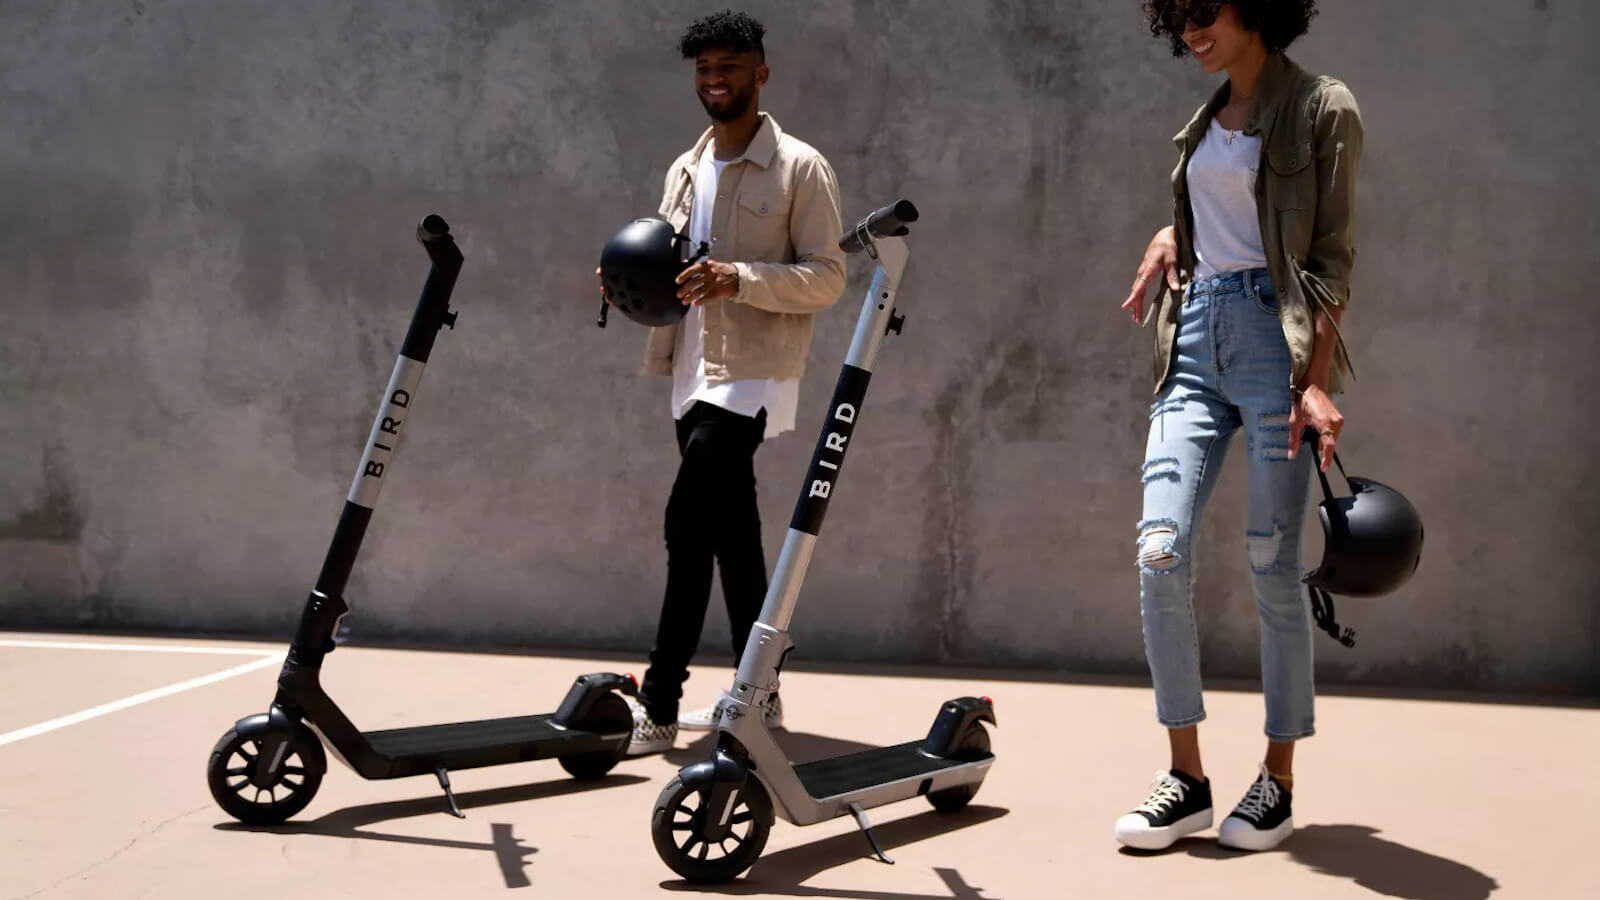 Bird Air compact electric scooter has Bluetooth connectivity